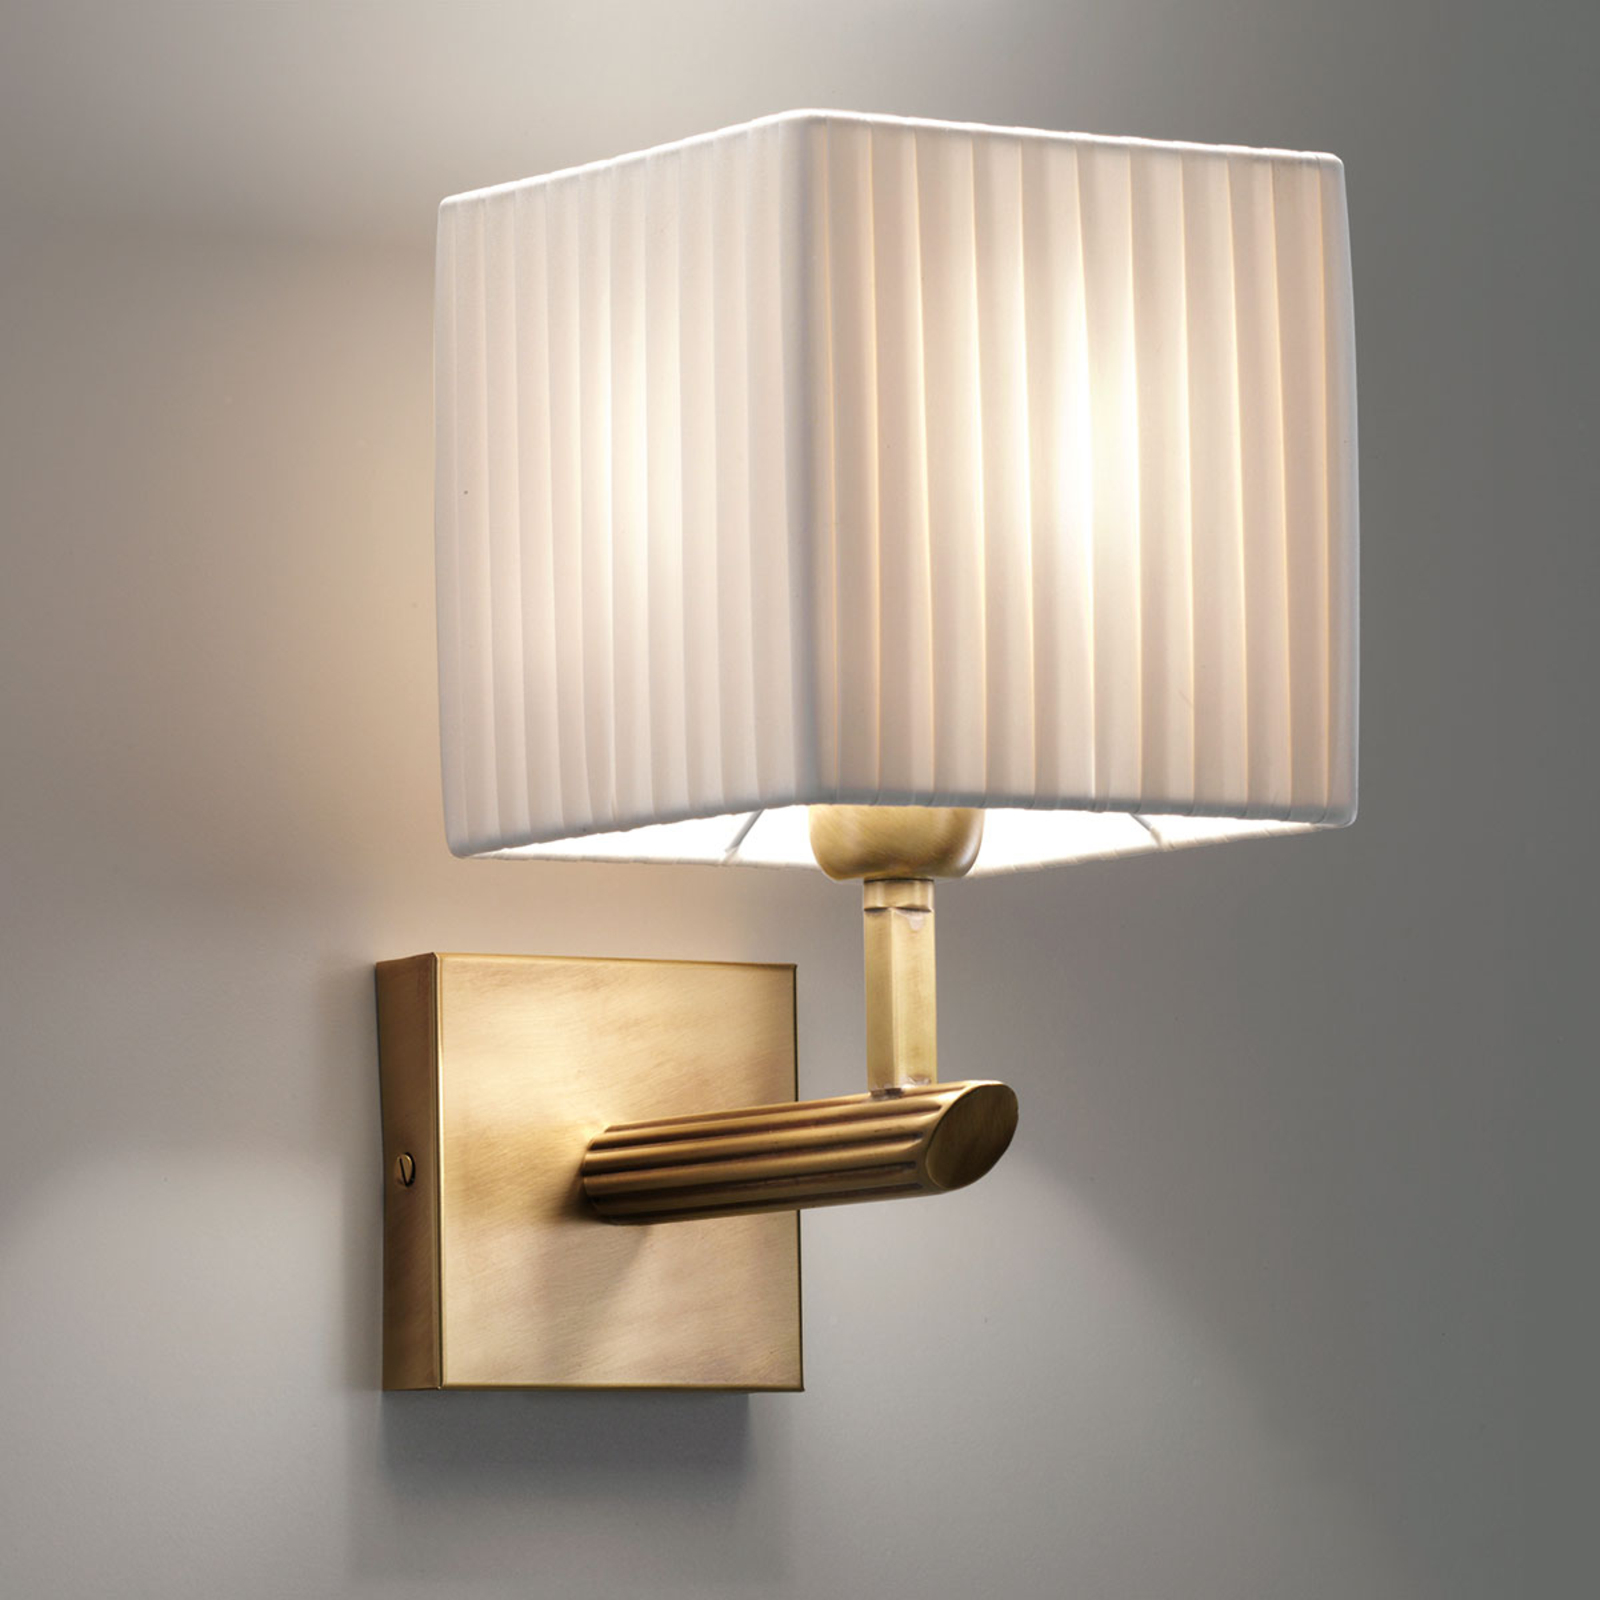 Warm light with the Imperial wall light